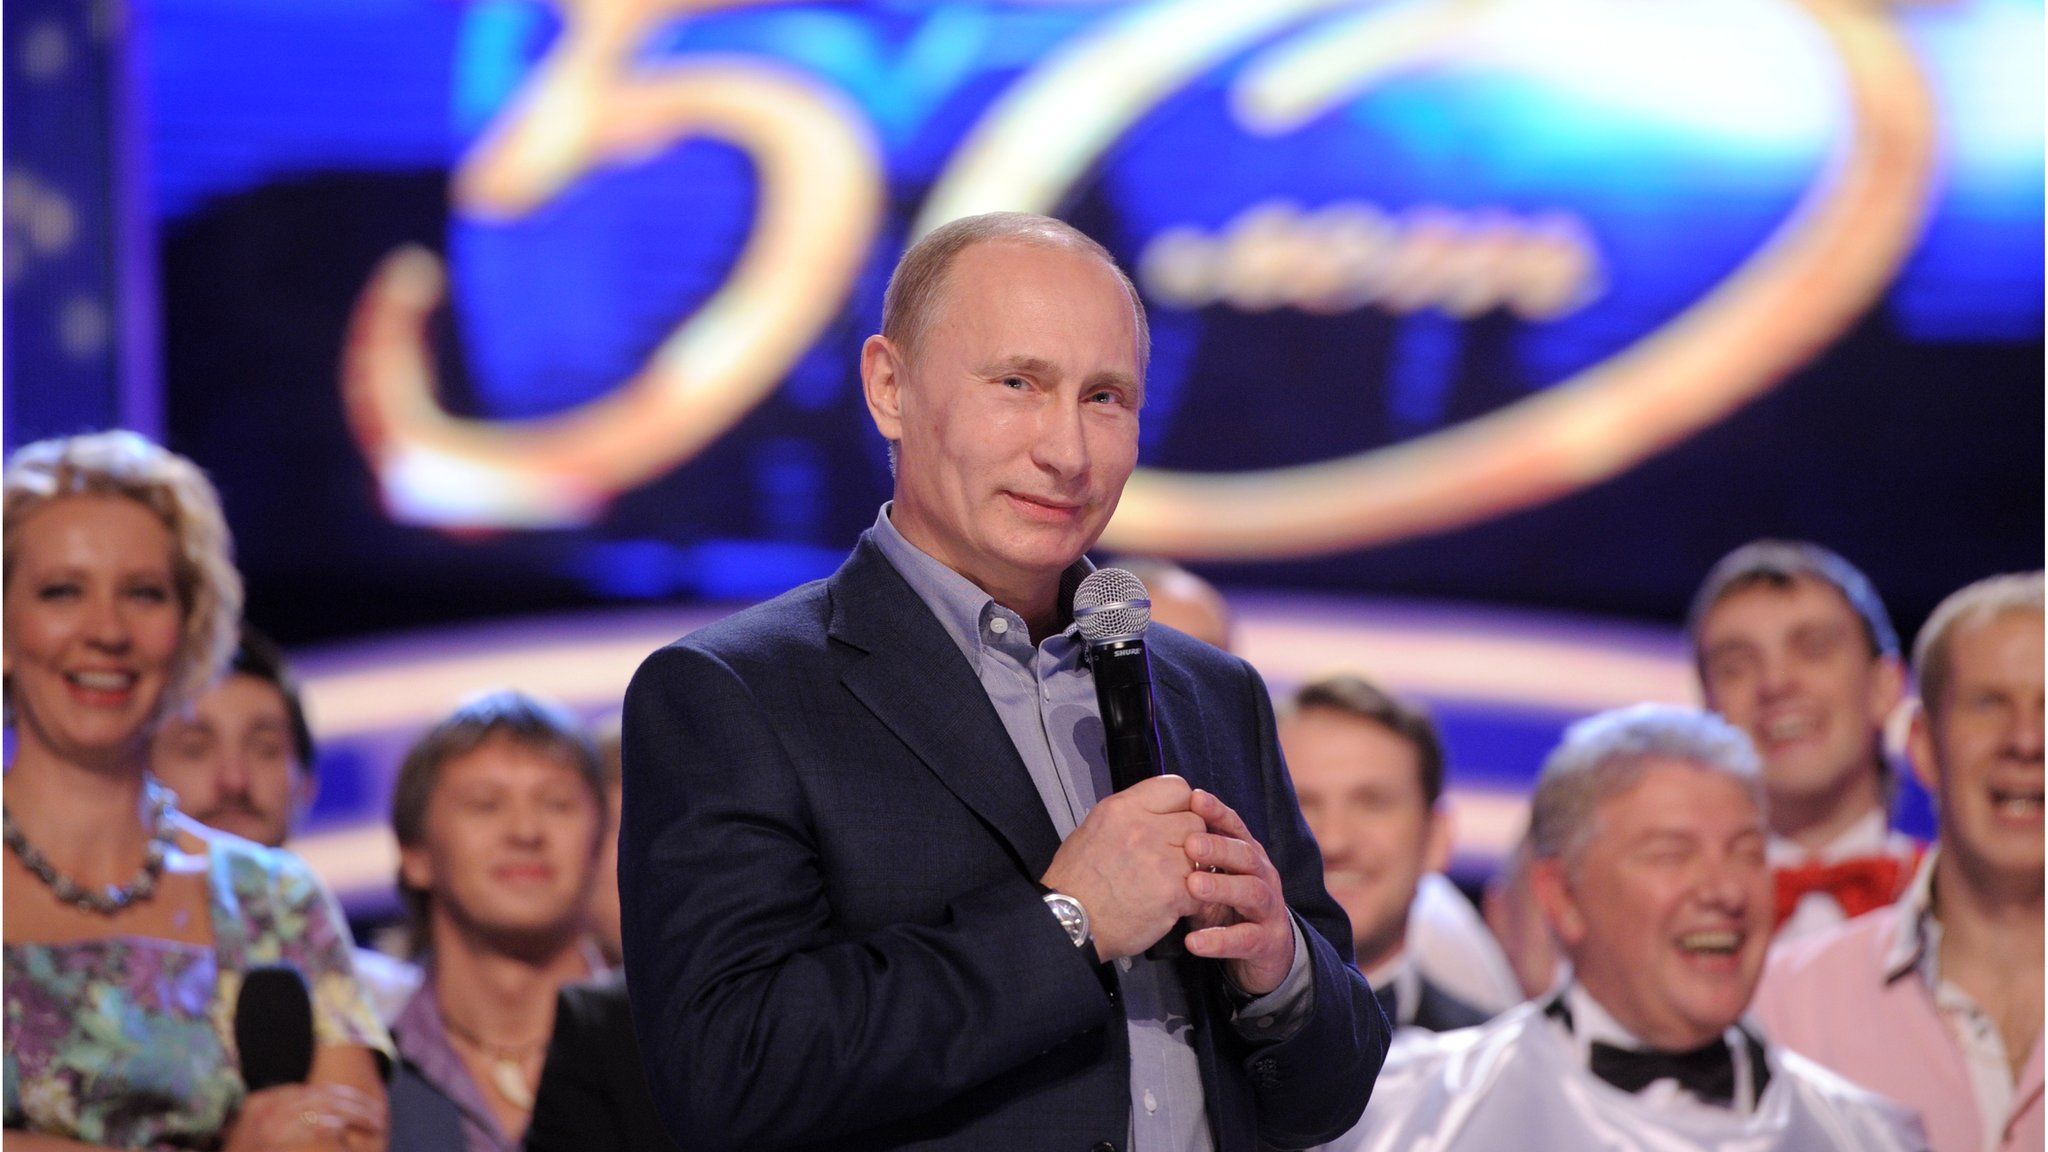 Russia's then Prime Minister, Vladimir Putin, attends a show to mark the 50th anniversary of the TV comedy show KVN in Moscow on 13 November 2011.